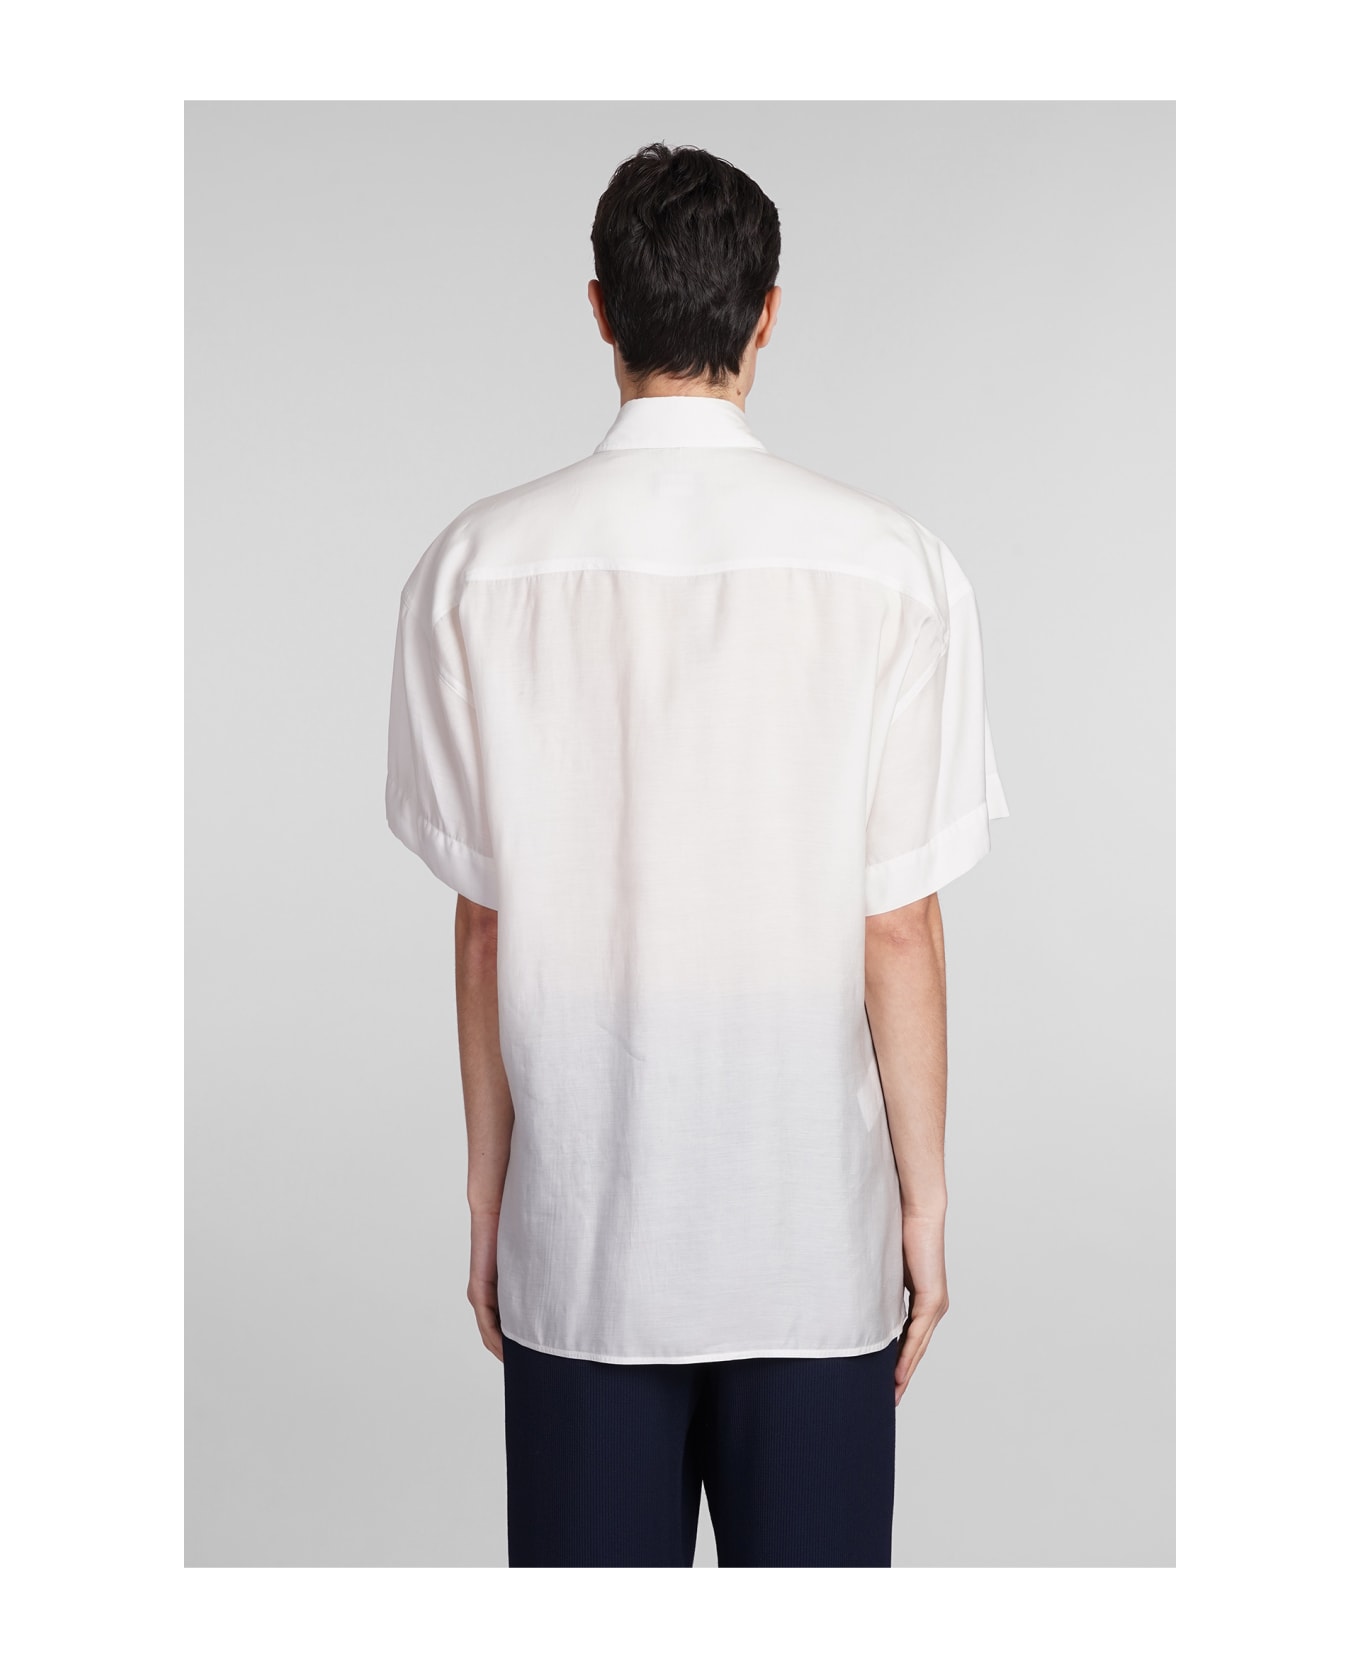 Giorgio Armani Shirt In White Wool And Polyester - white